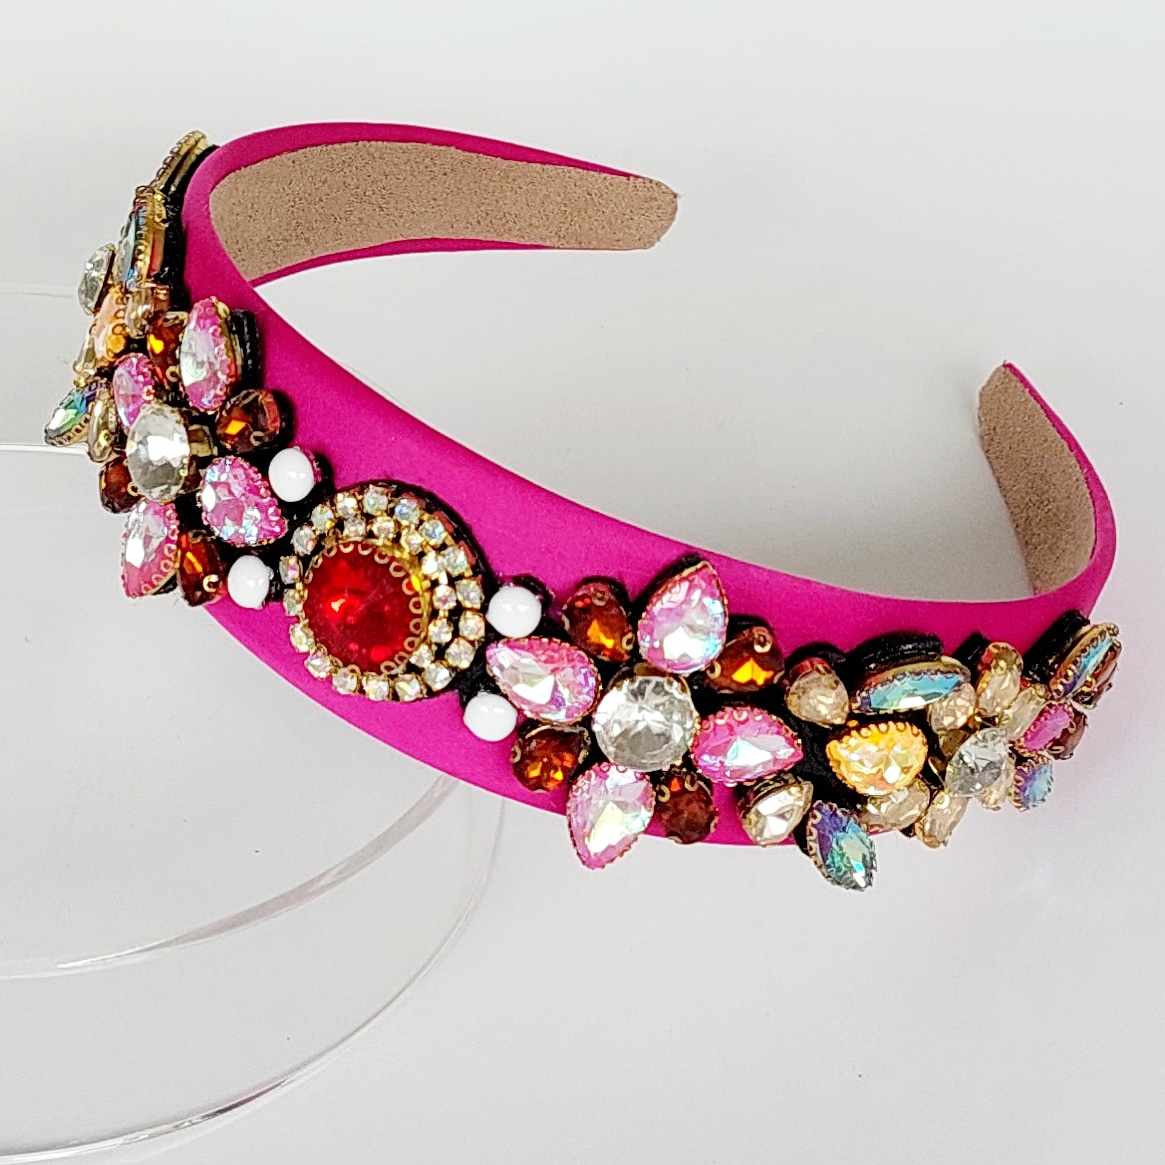 jewelled hot pink headband for the races